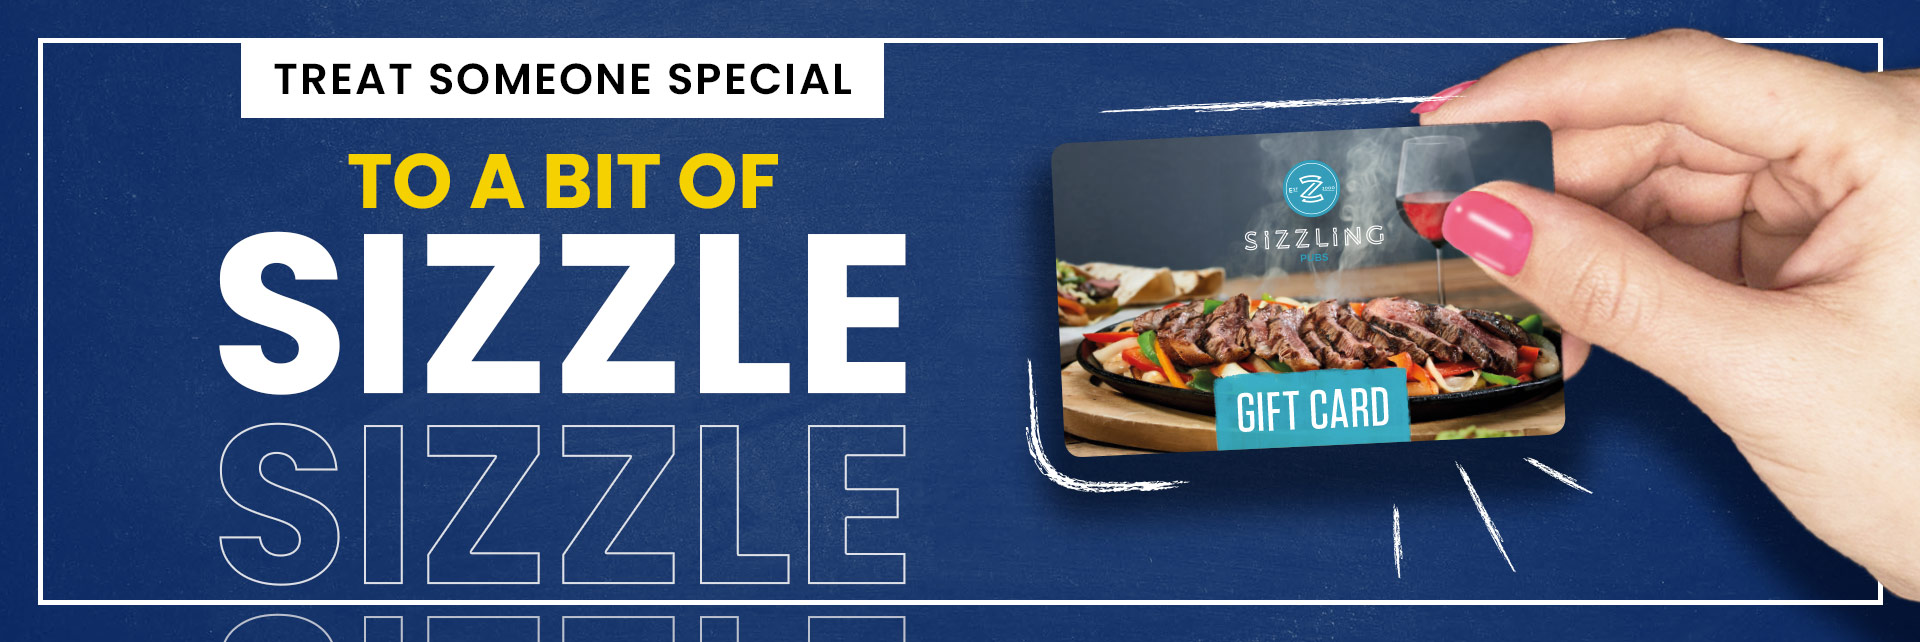 Sizzling Pubs Gift Card at The Haddon Hall in Manchester